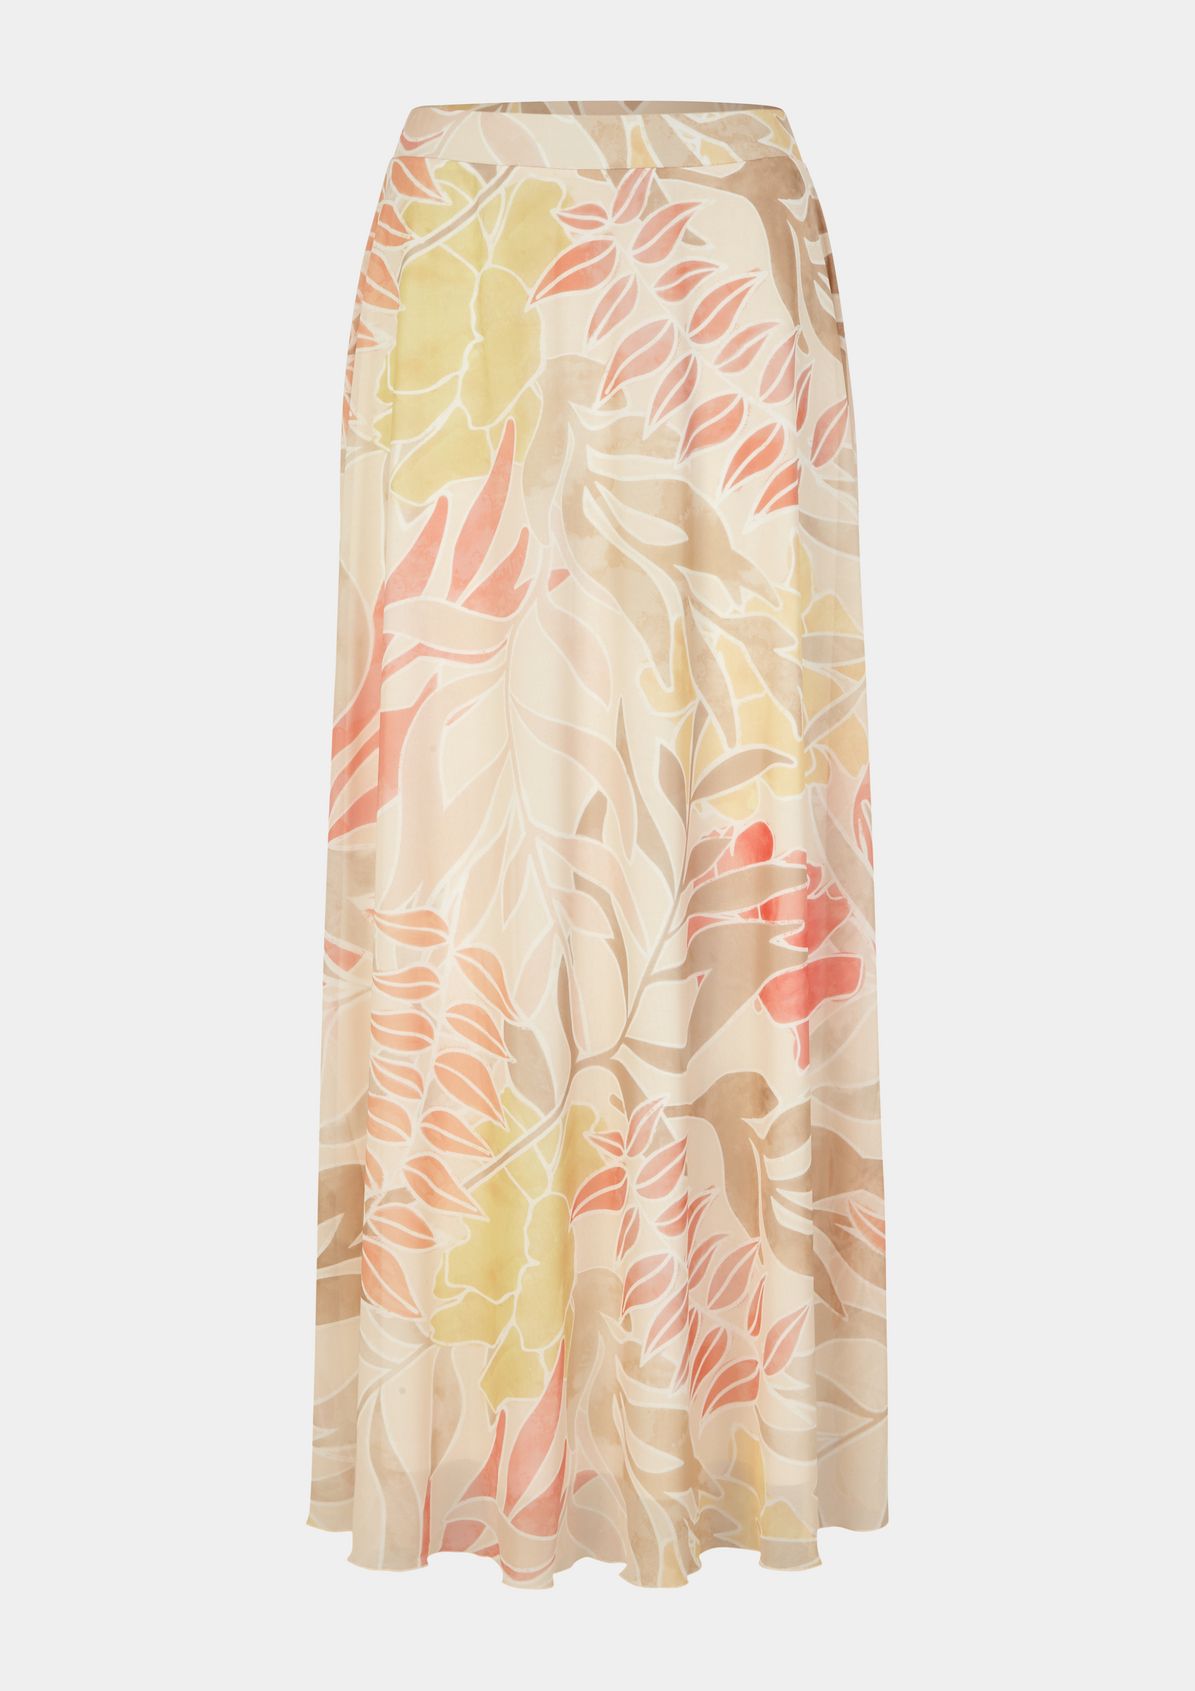 Printed mesh skirt from comma